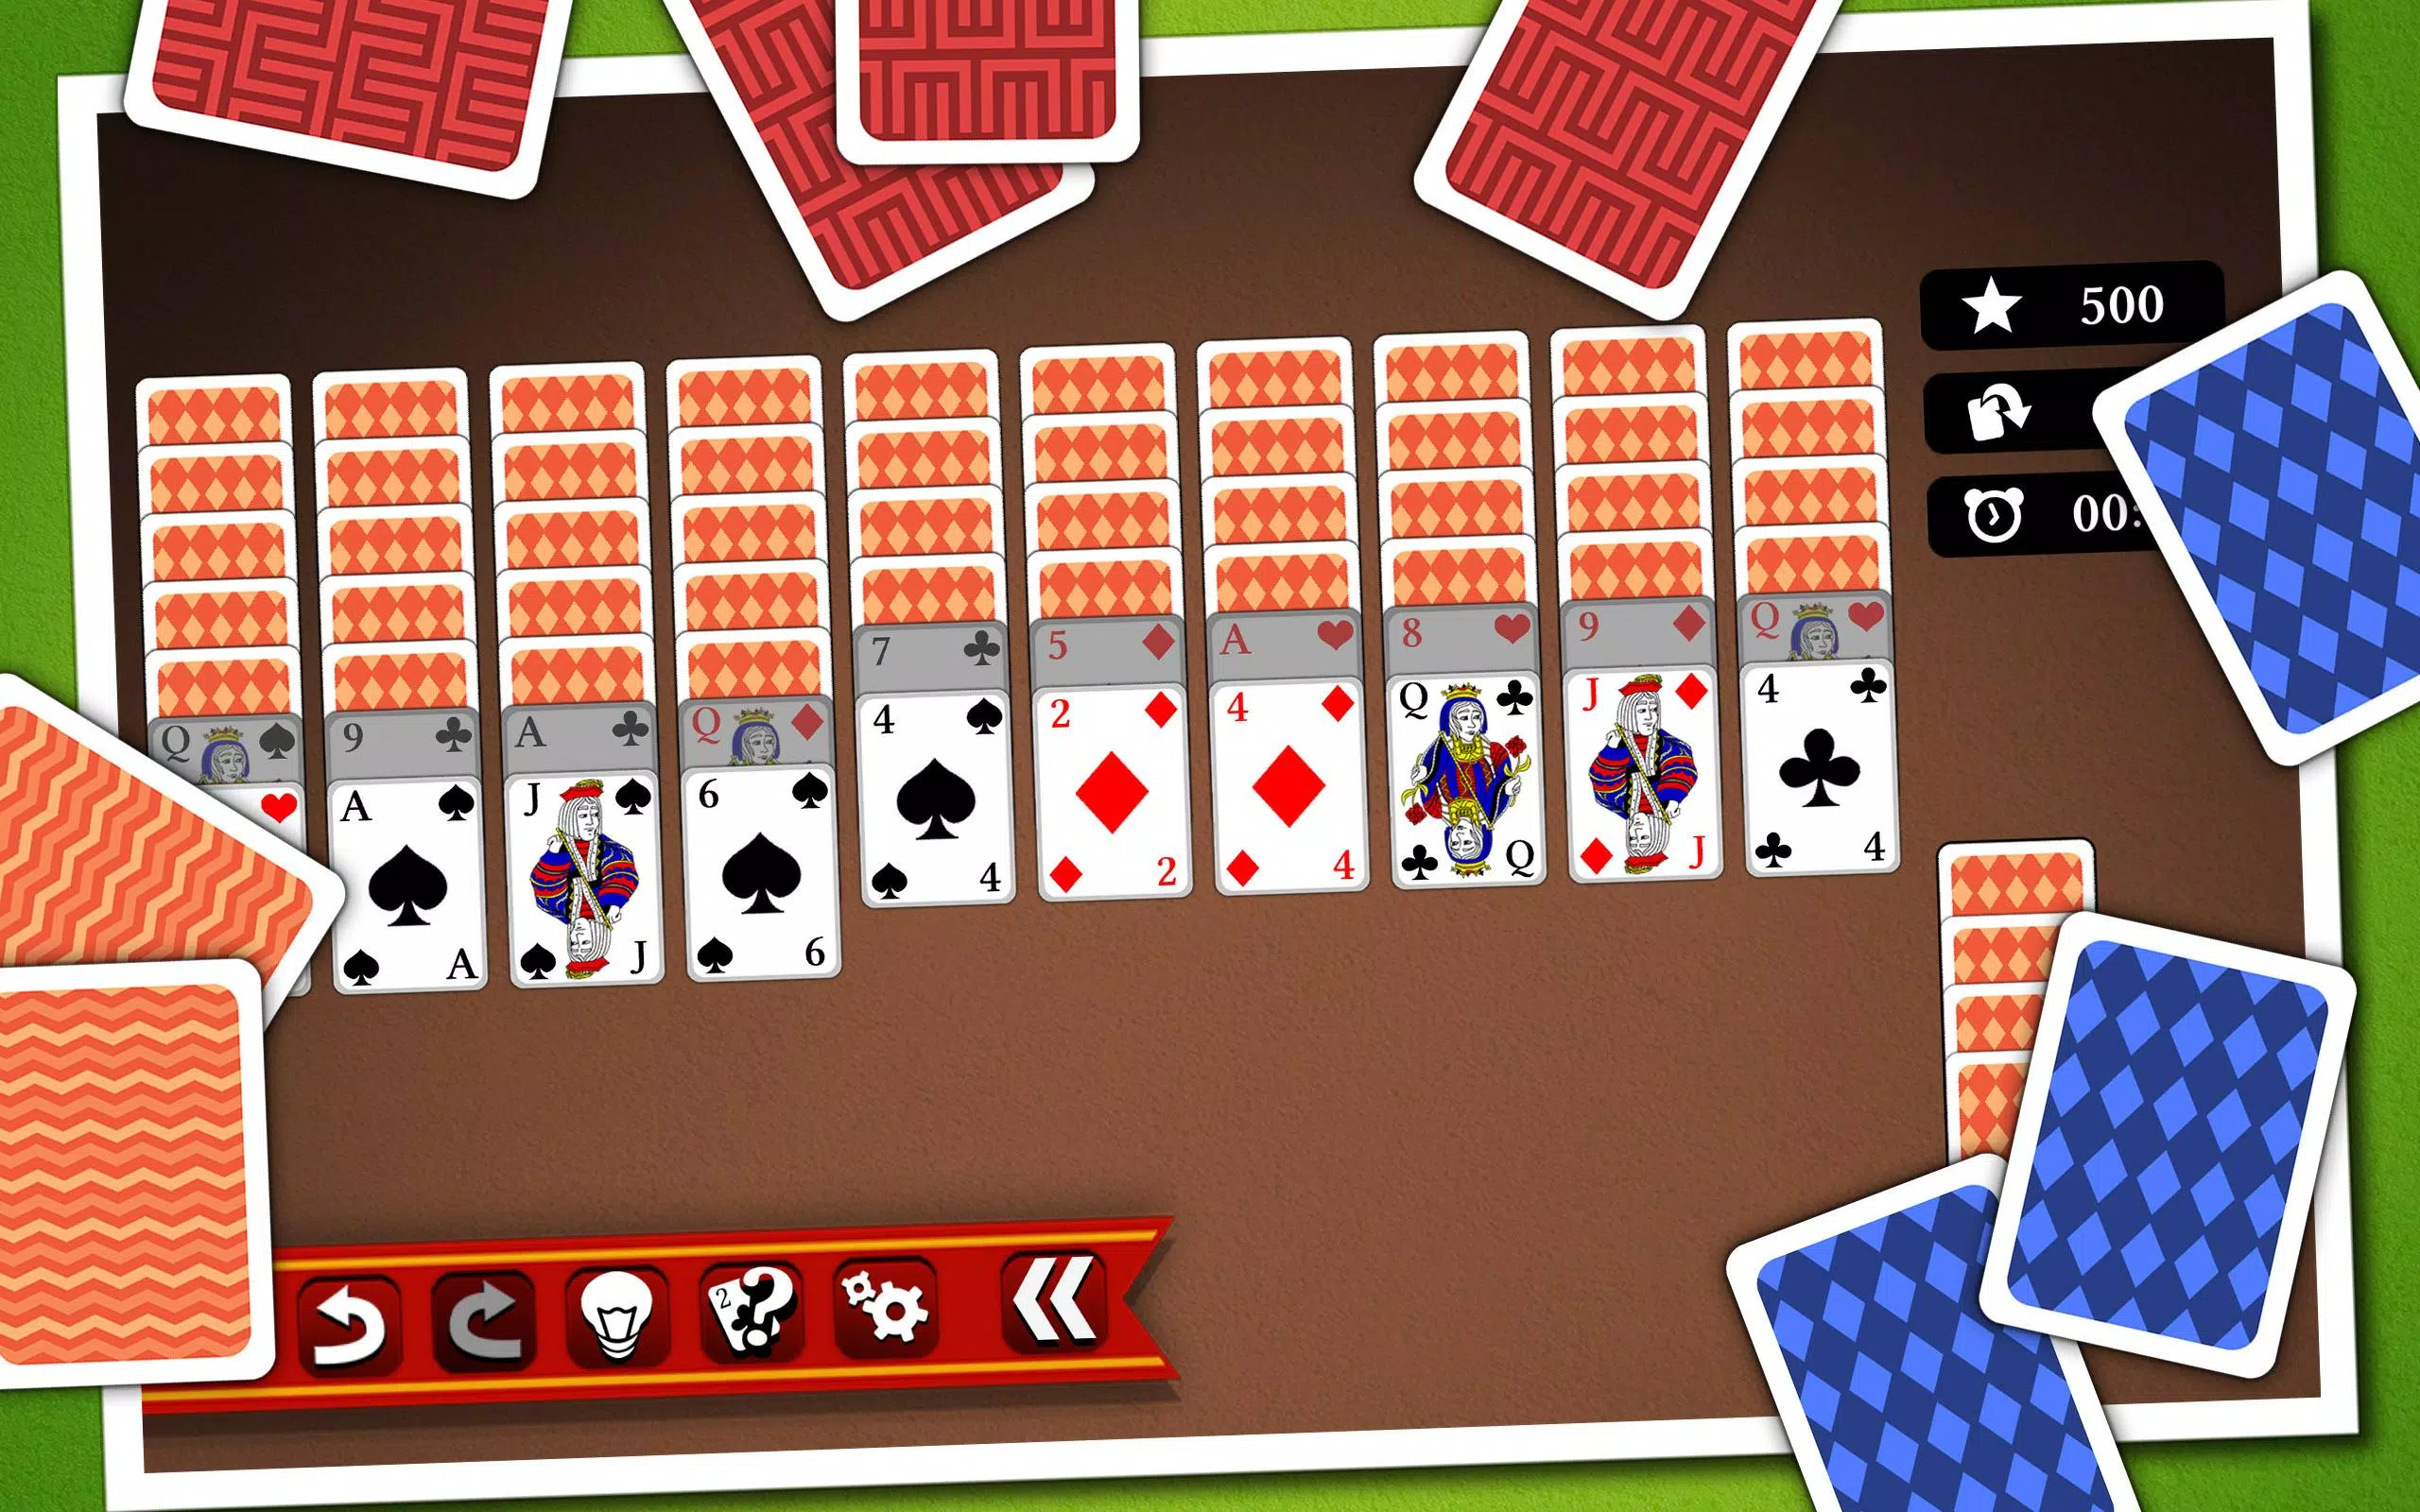 Spider Solitaire 2 for Download